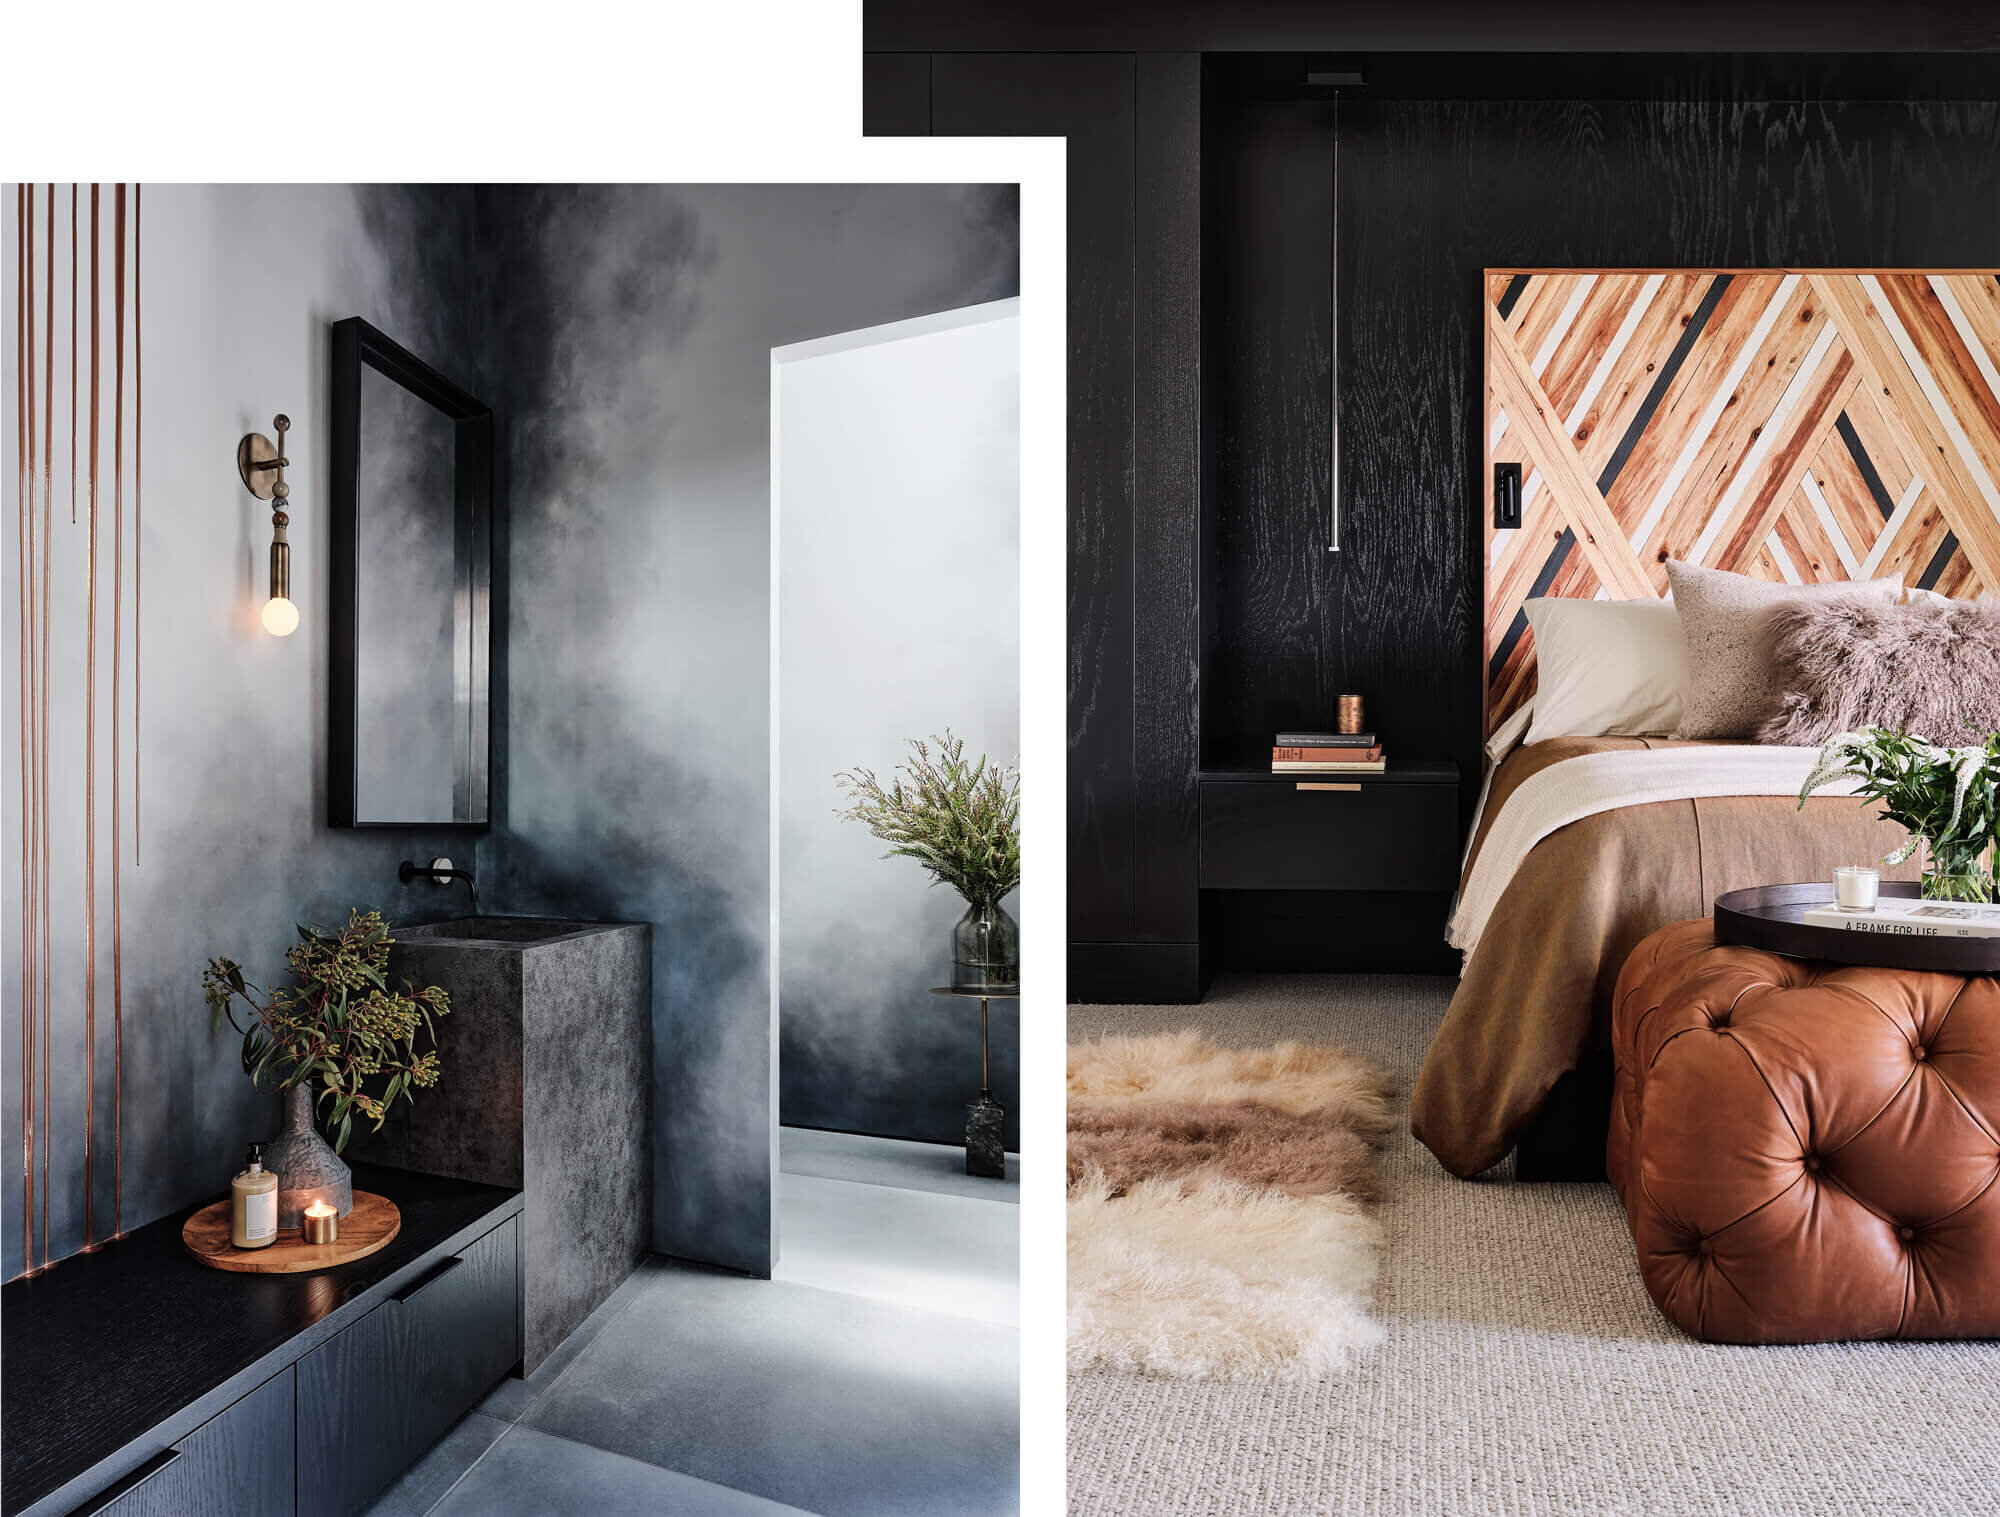 Two images: First has a bathroom with paint effect that looks like dark mist. the other is the bedroom with a woven multi-toned wood headboard that reflects the other fabric tones in room that are leather and fur.